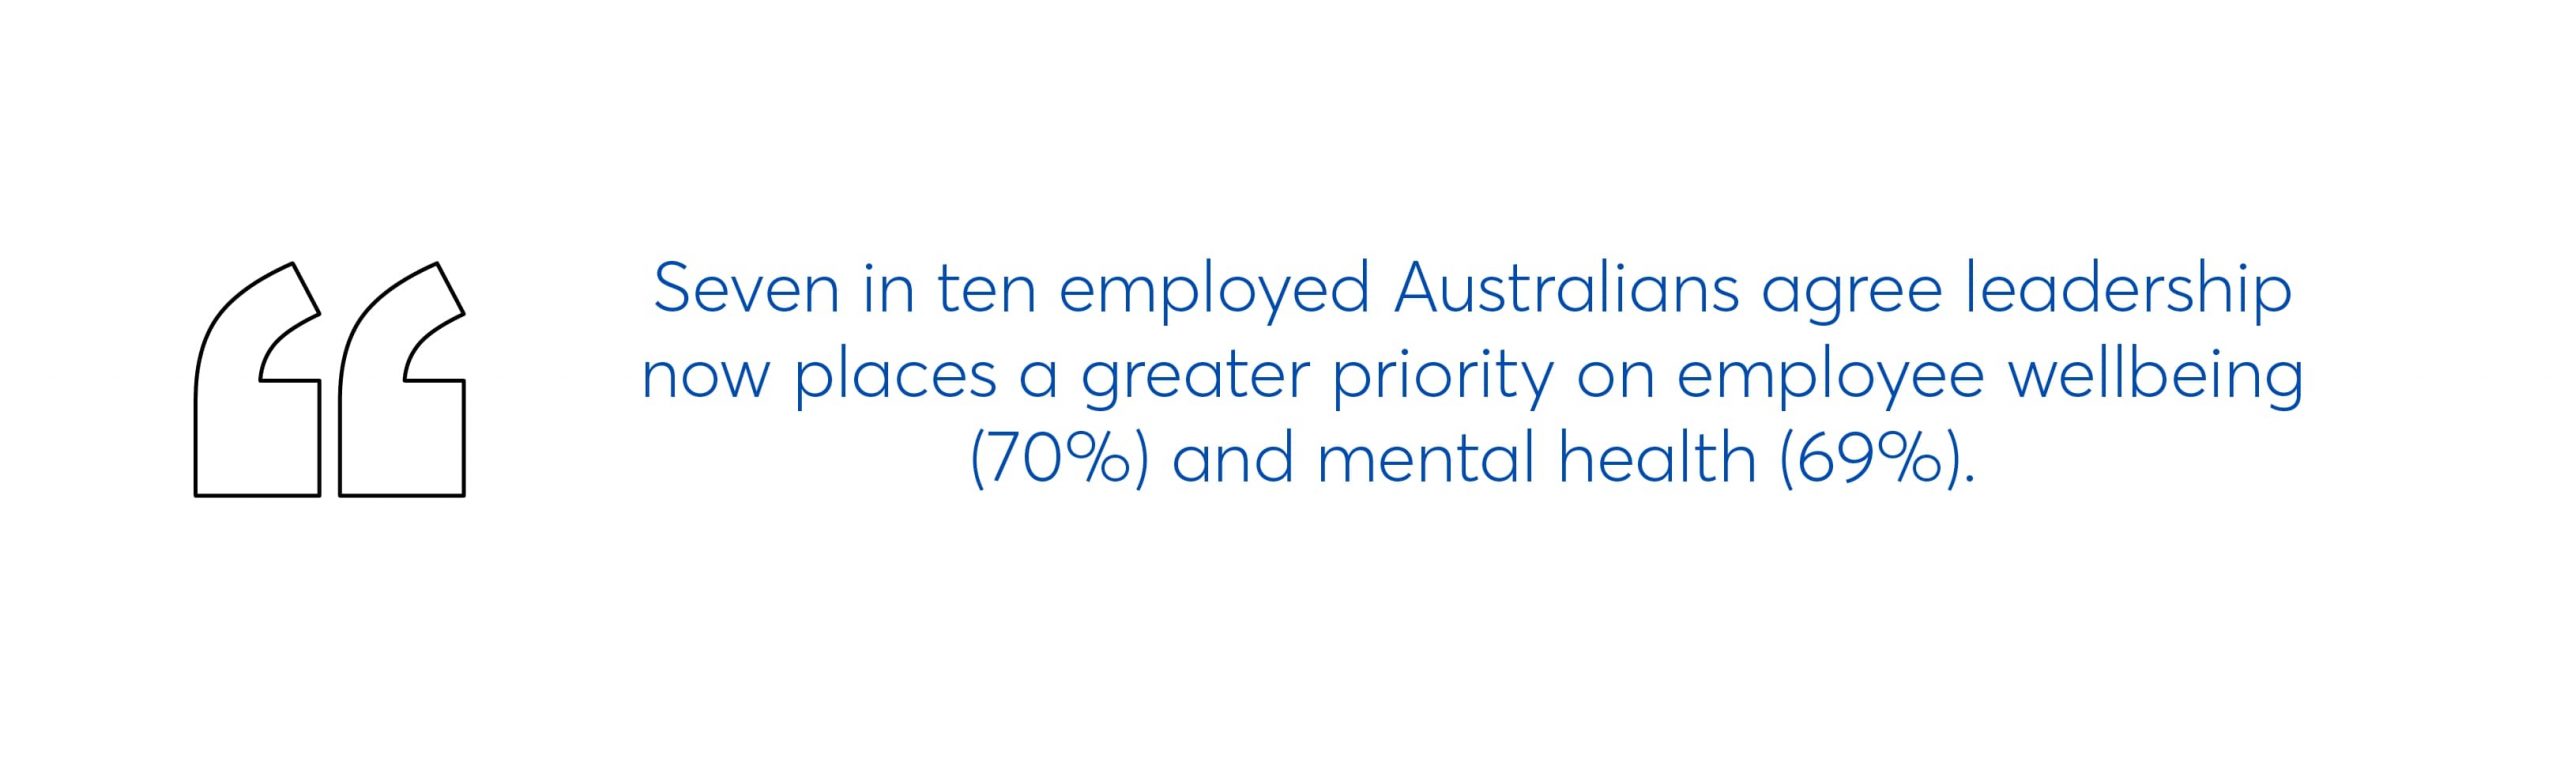 7 in 10 employed australians agree leadership now places a greater priority on employee wellbeing and mental health